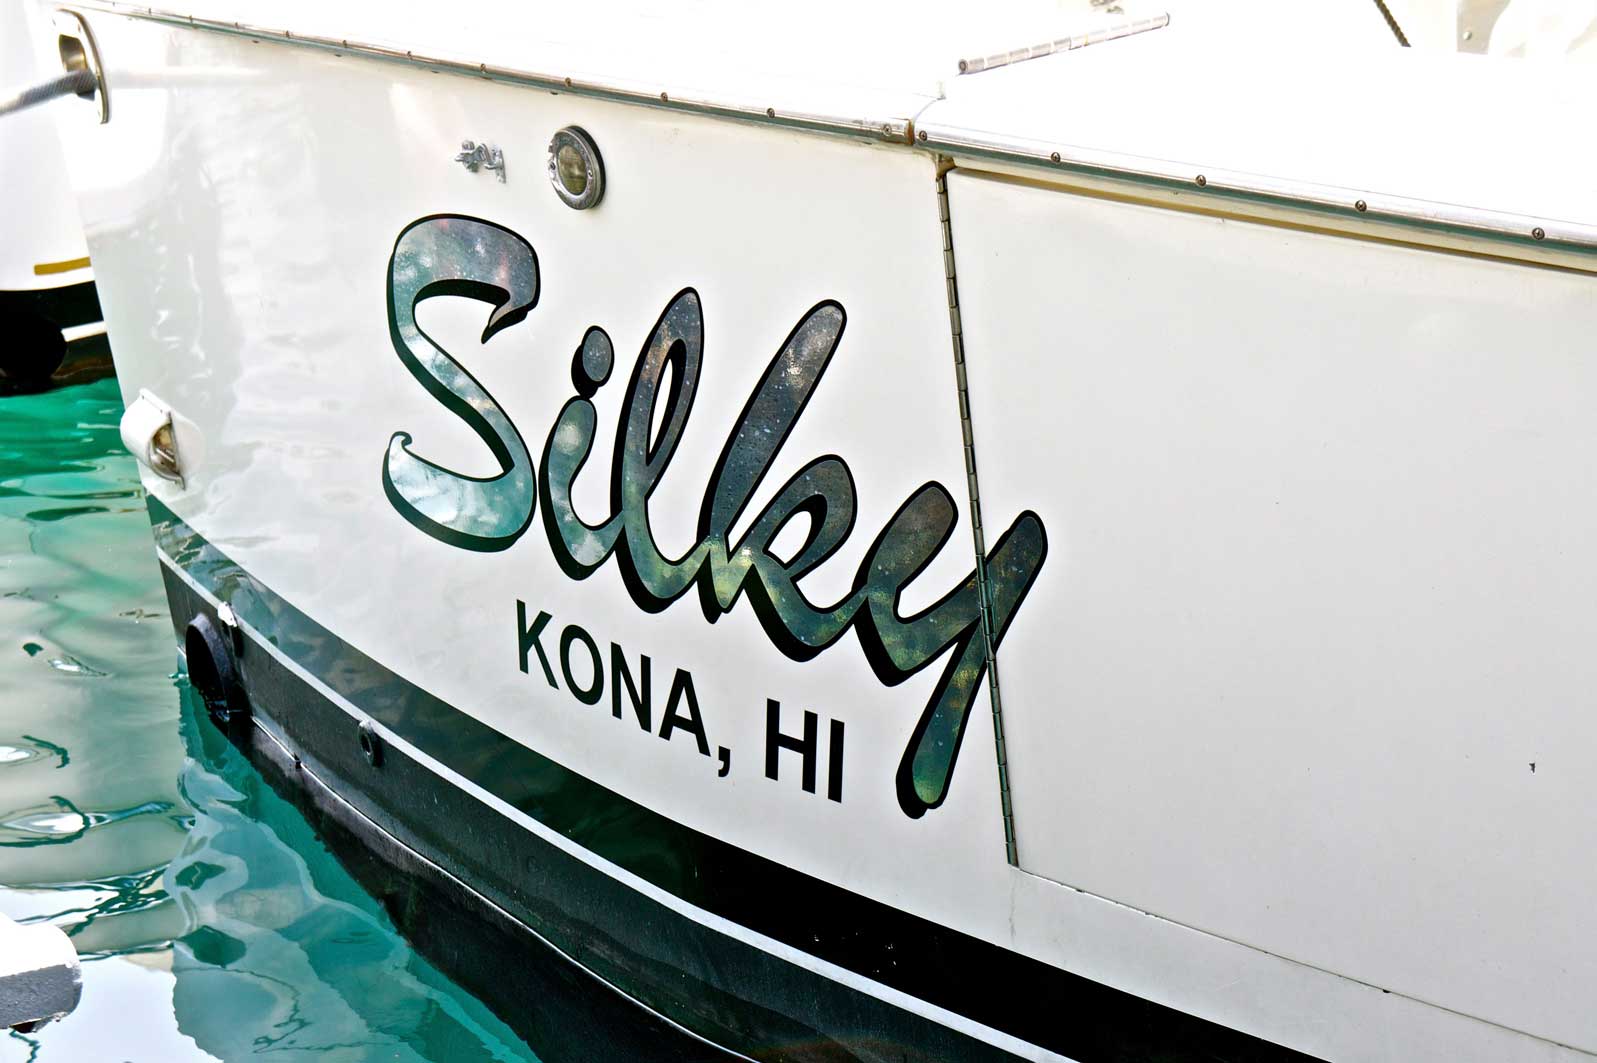 Silky Fishing Charter Boat name on back of boat